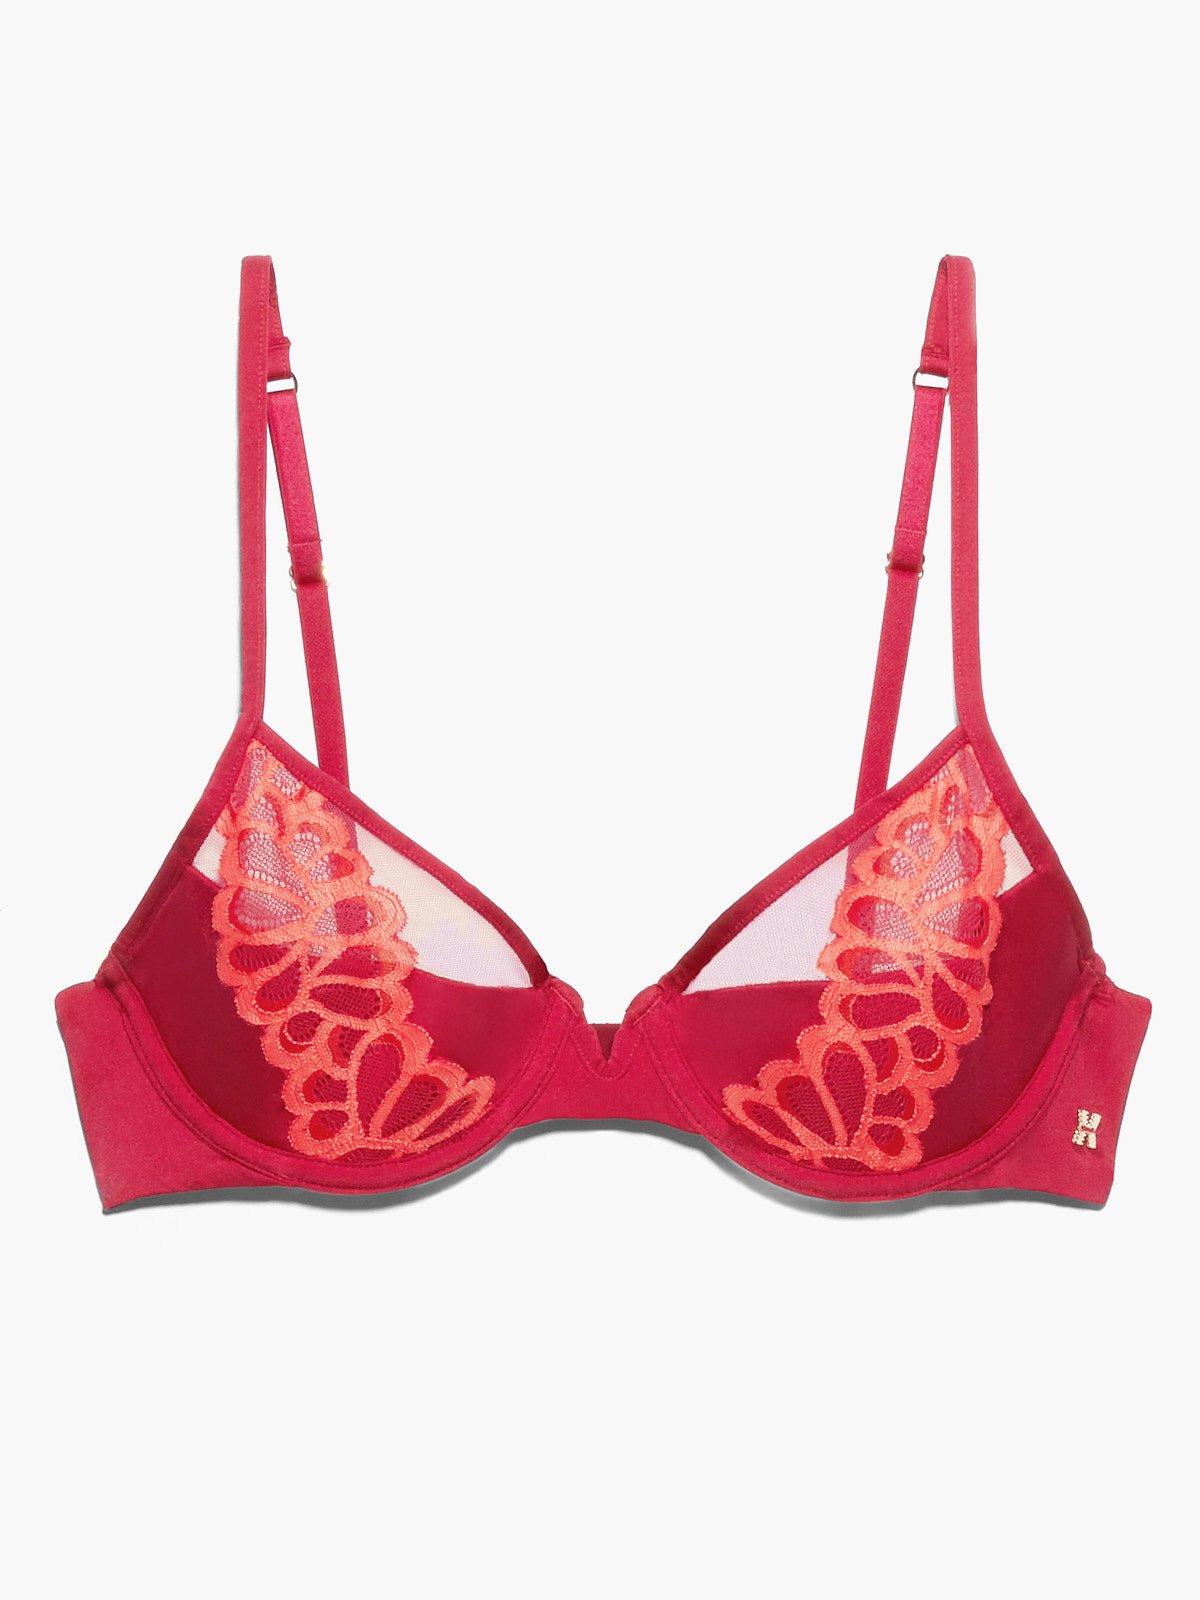 Savage Not Sorry Half Cup Bra with Lace in Pink & Red | SAVAGE X FENTY